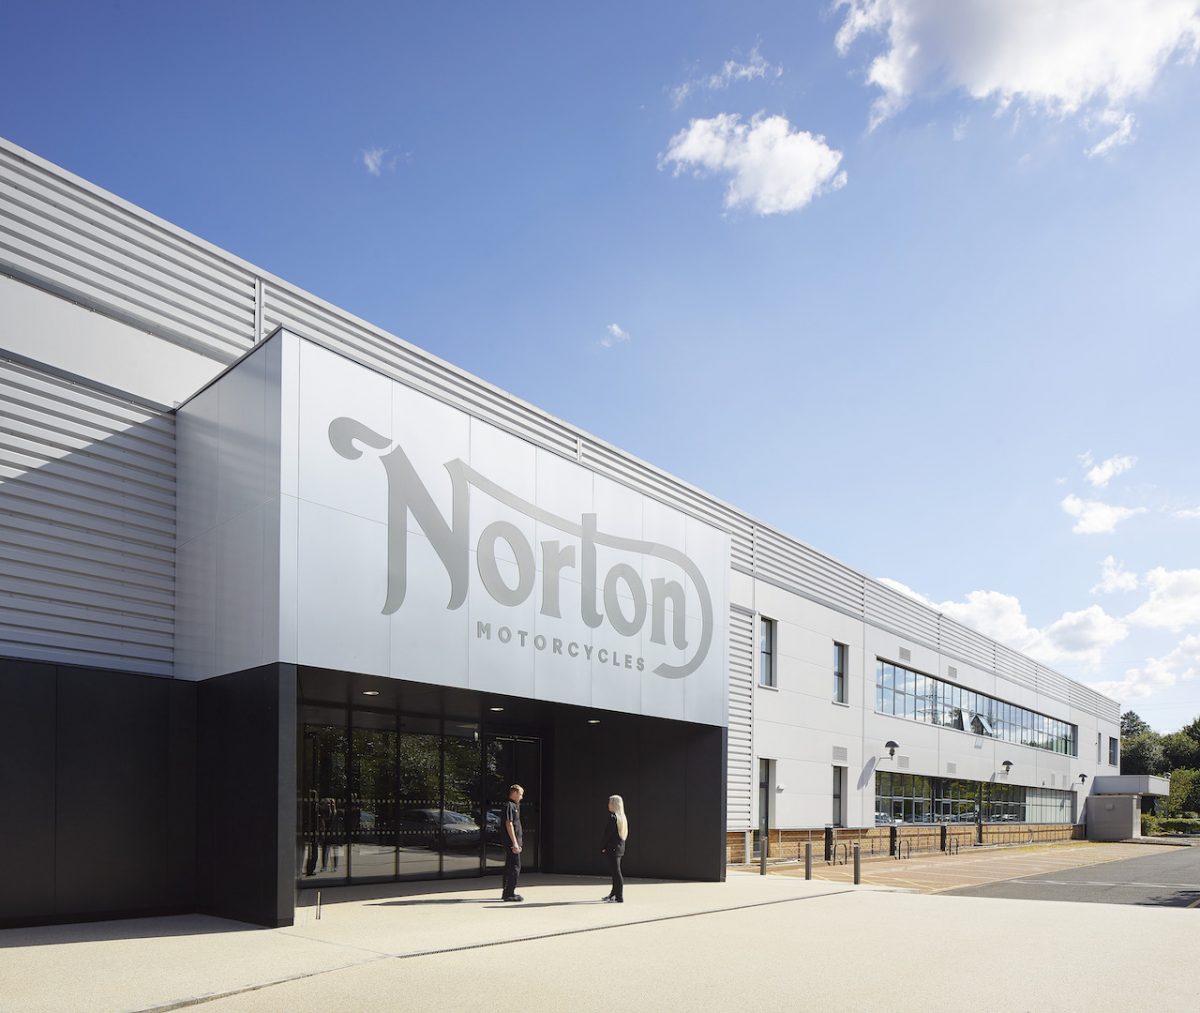 Exterior of a building with 'Norton' written above the doorway